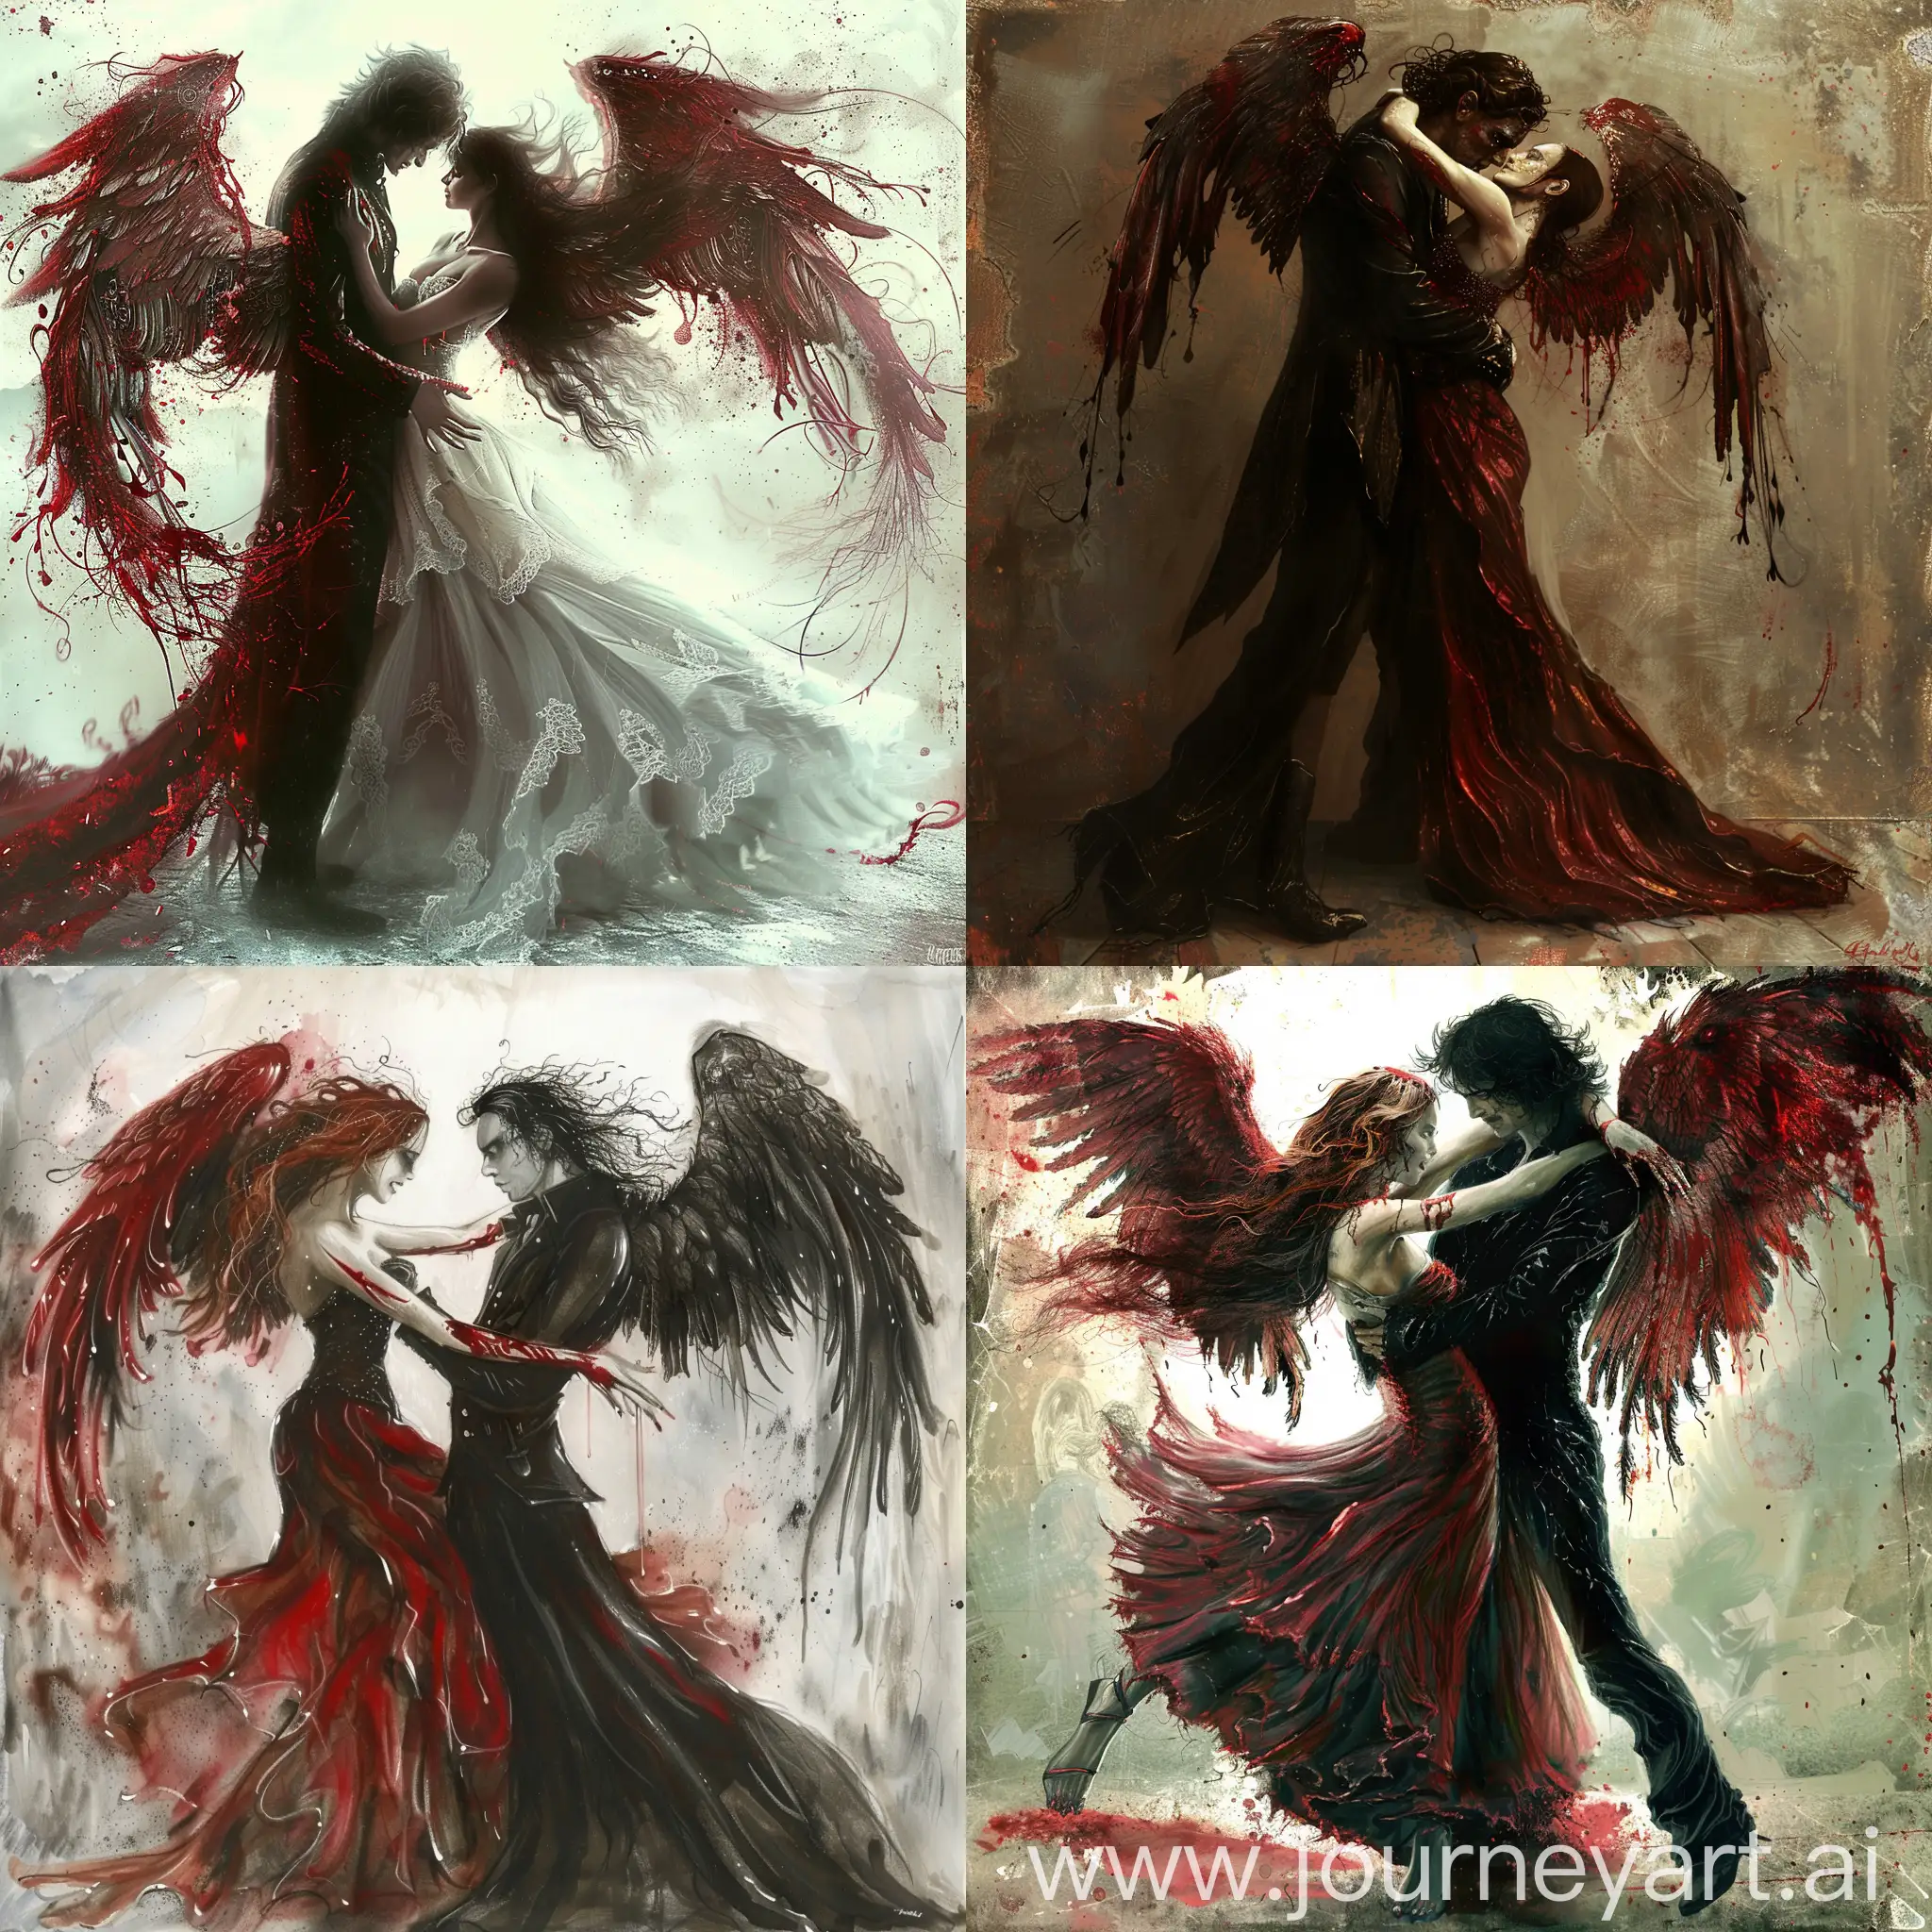 And an angel with bloody wings dances with death in the sound of your laughter.